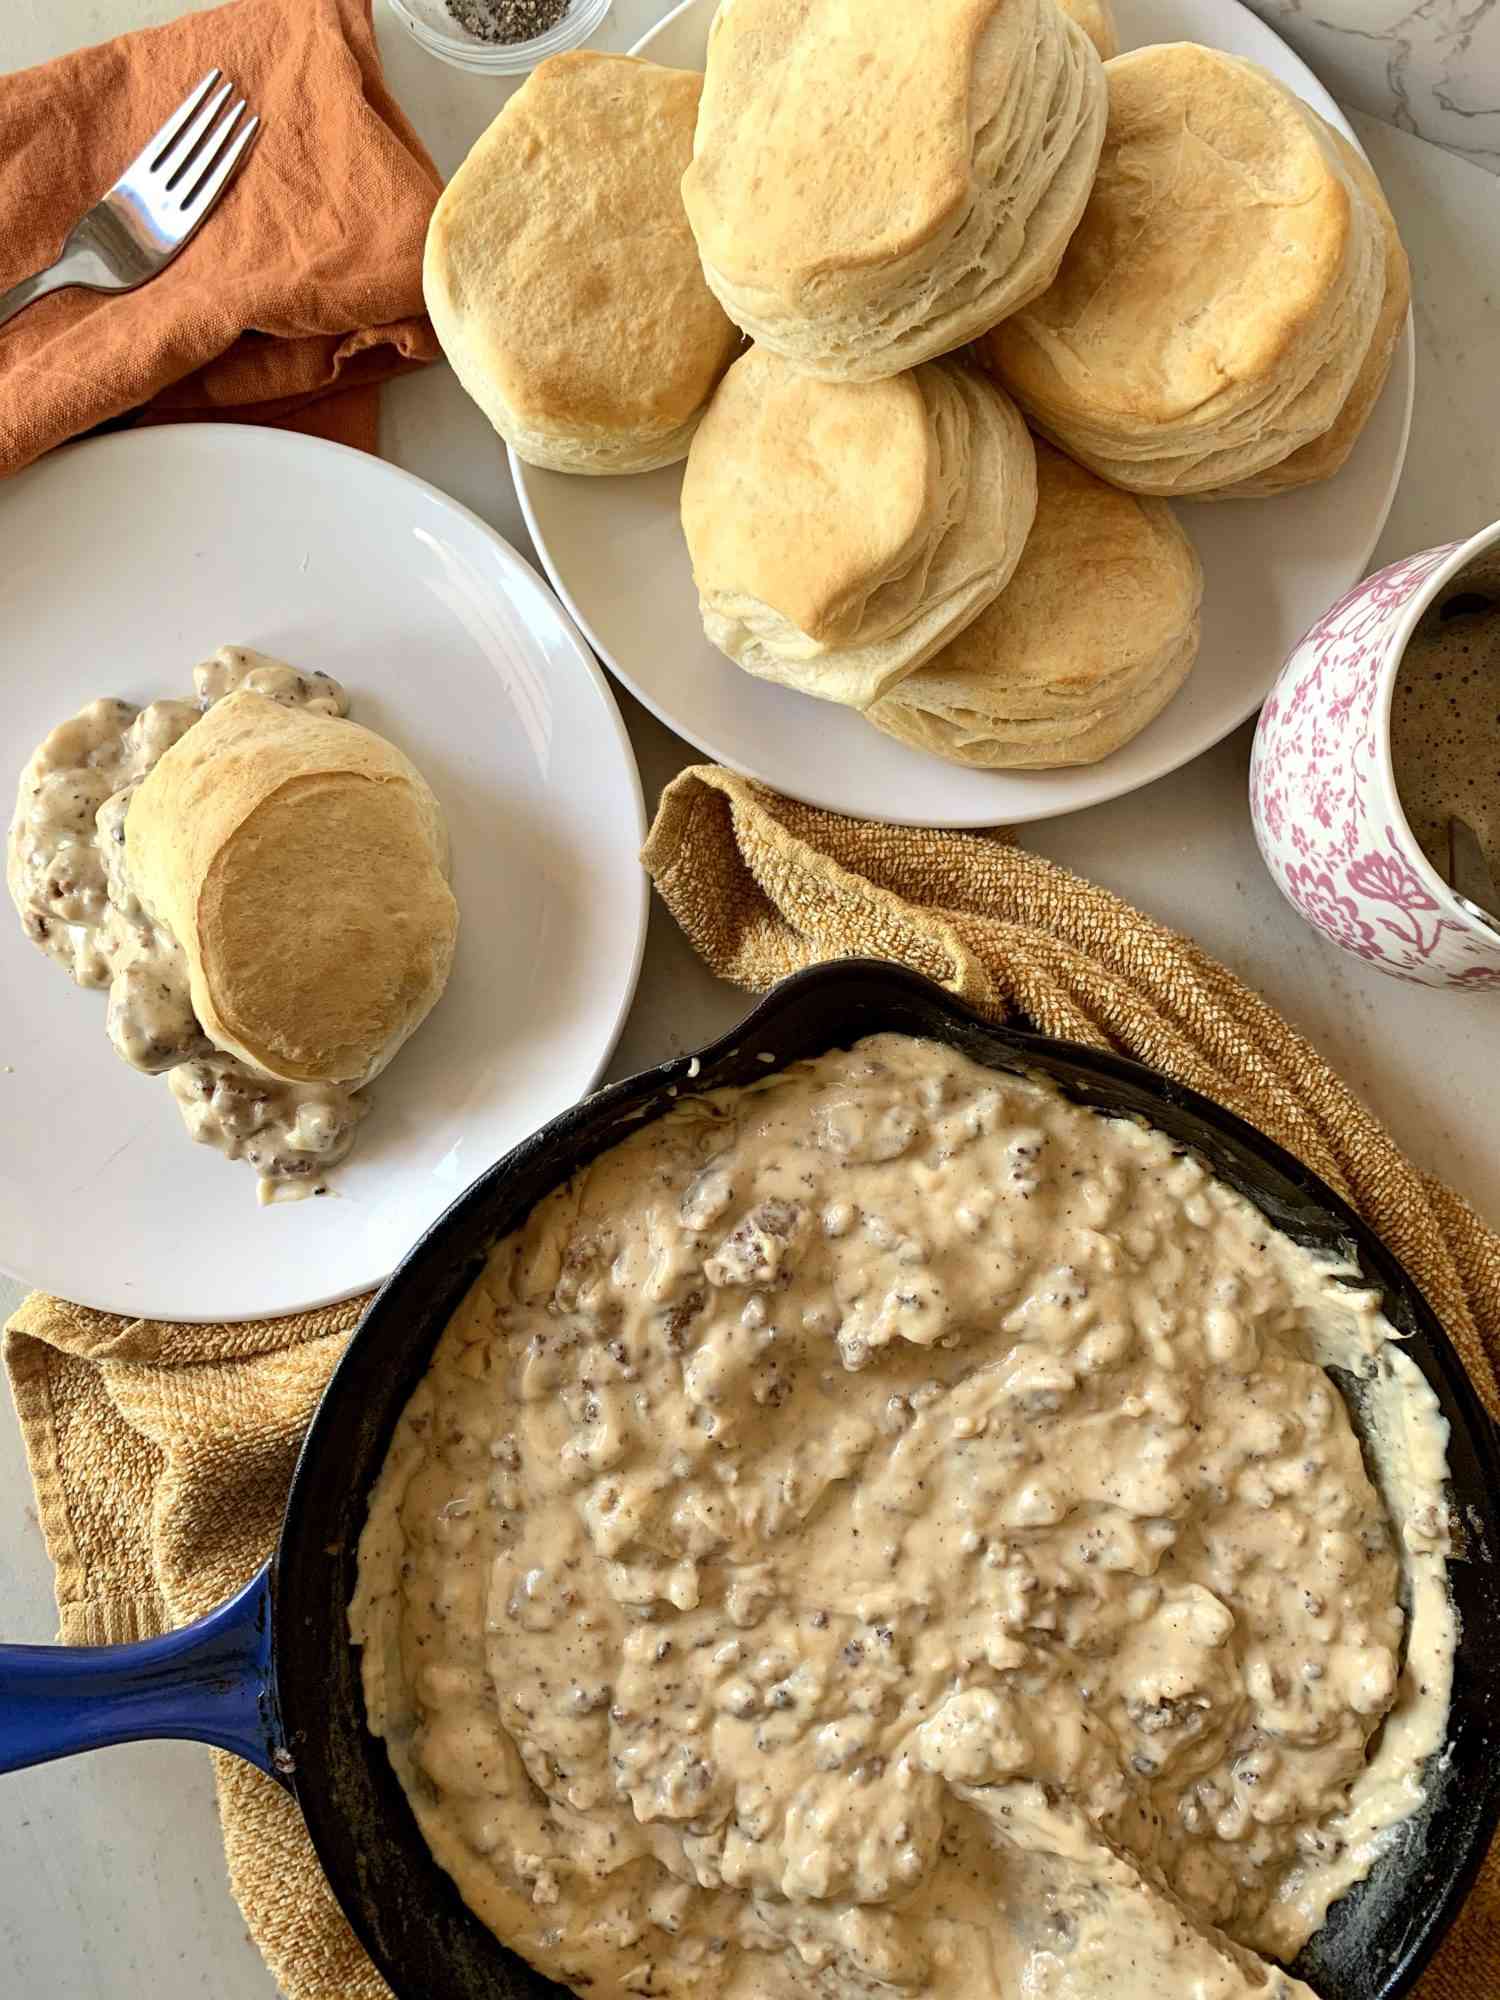 Skillet of Southern-Style Sawmill Sausage Gravy with platters of biscuits.